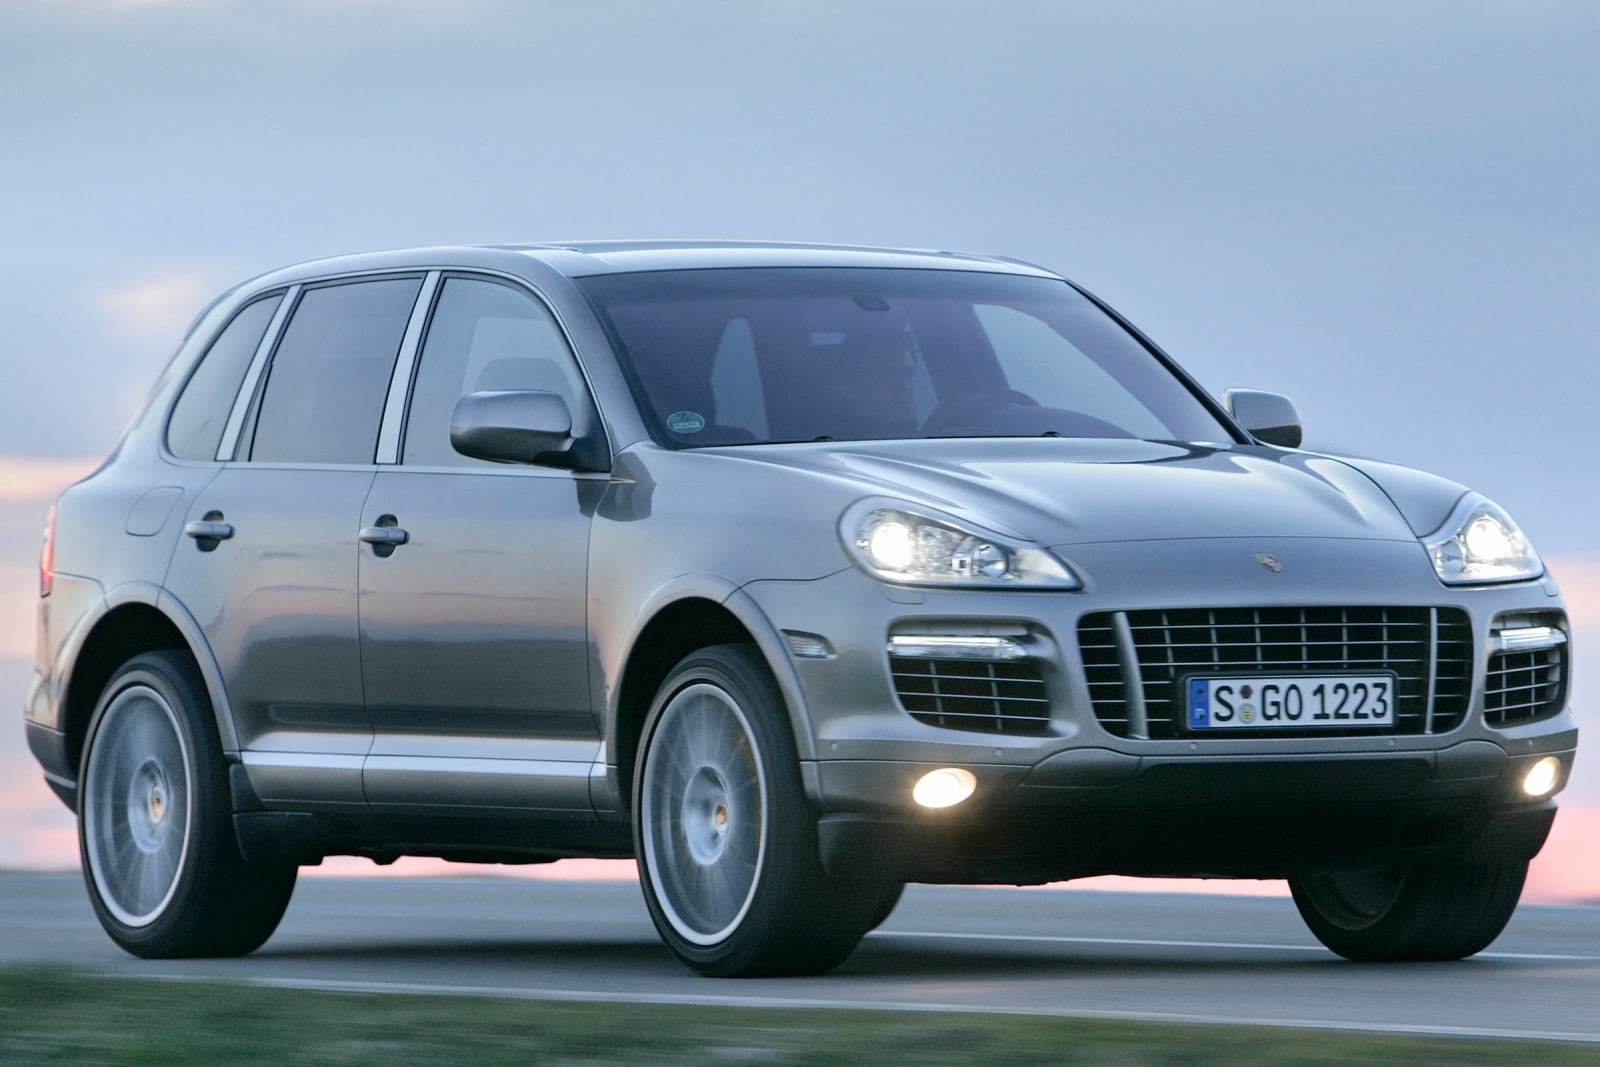 Used 2010 Porsche Cayenne Turbo S Review | Edmunds